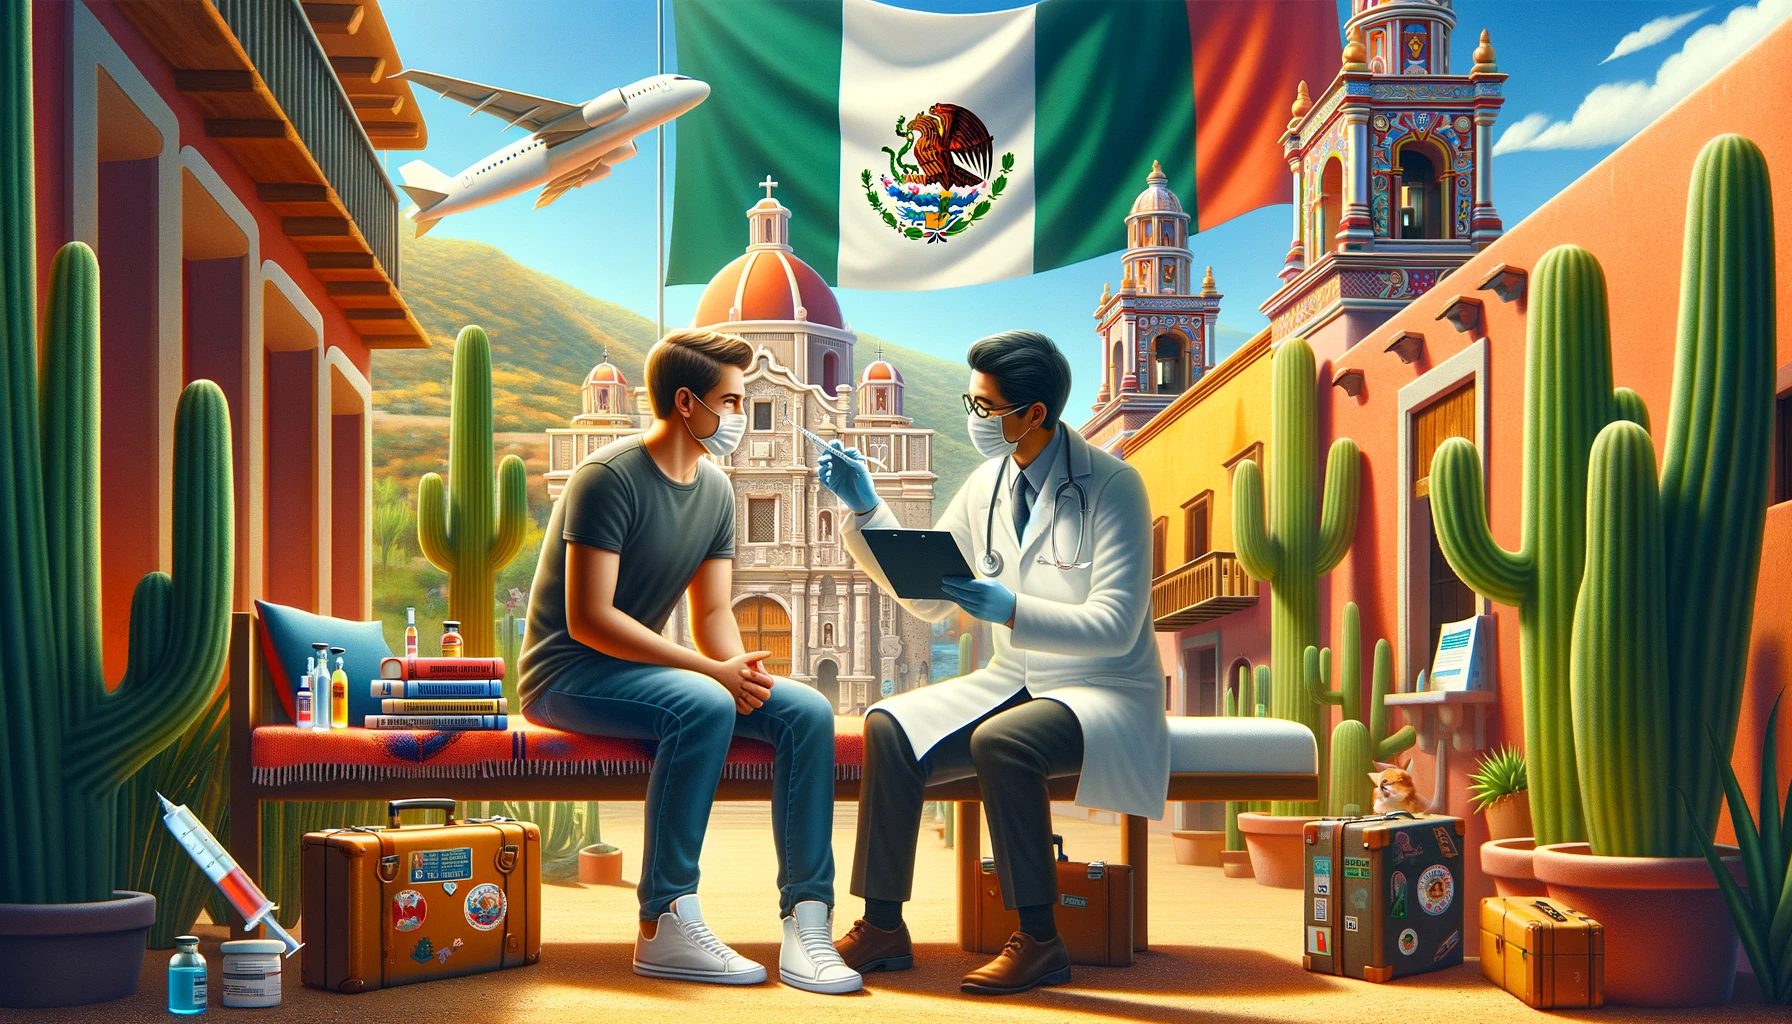 Illustration of vaccination in colorful Mexican setting.